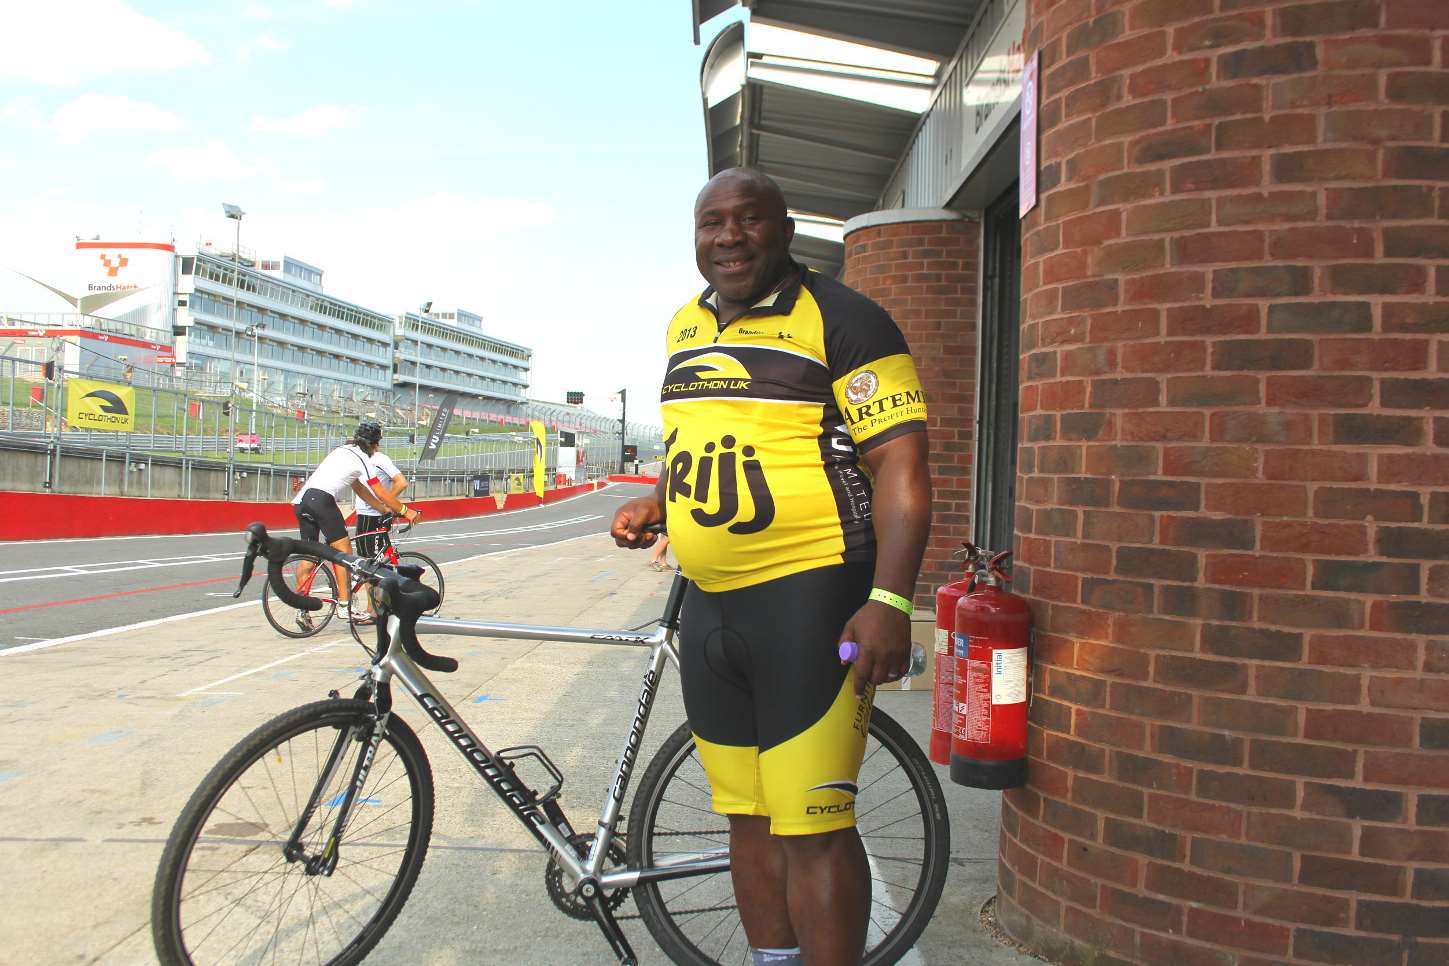 Cyclothon UK was set up by former England Rugby player Victor Ubogu, who regularly competes in the event